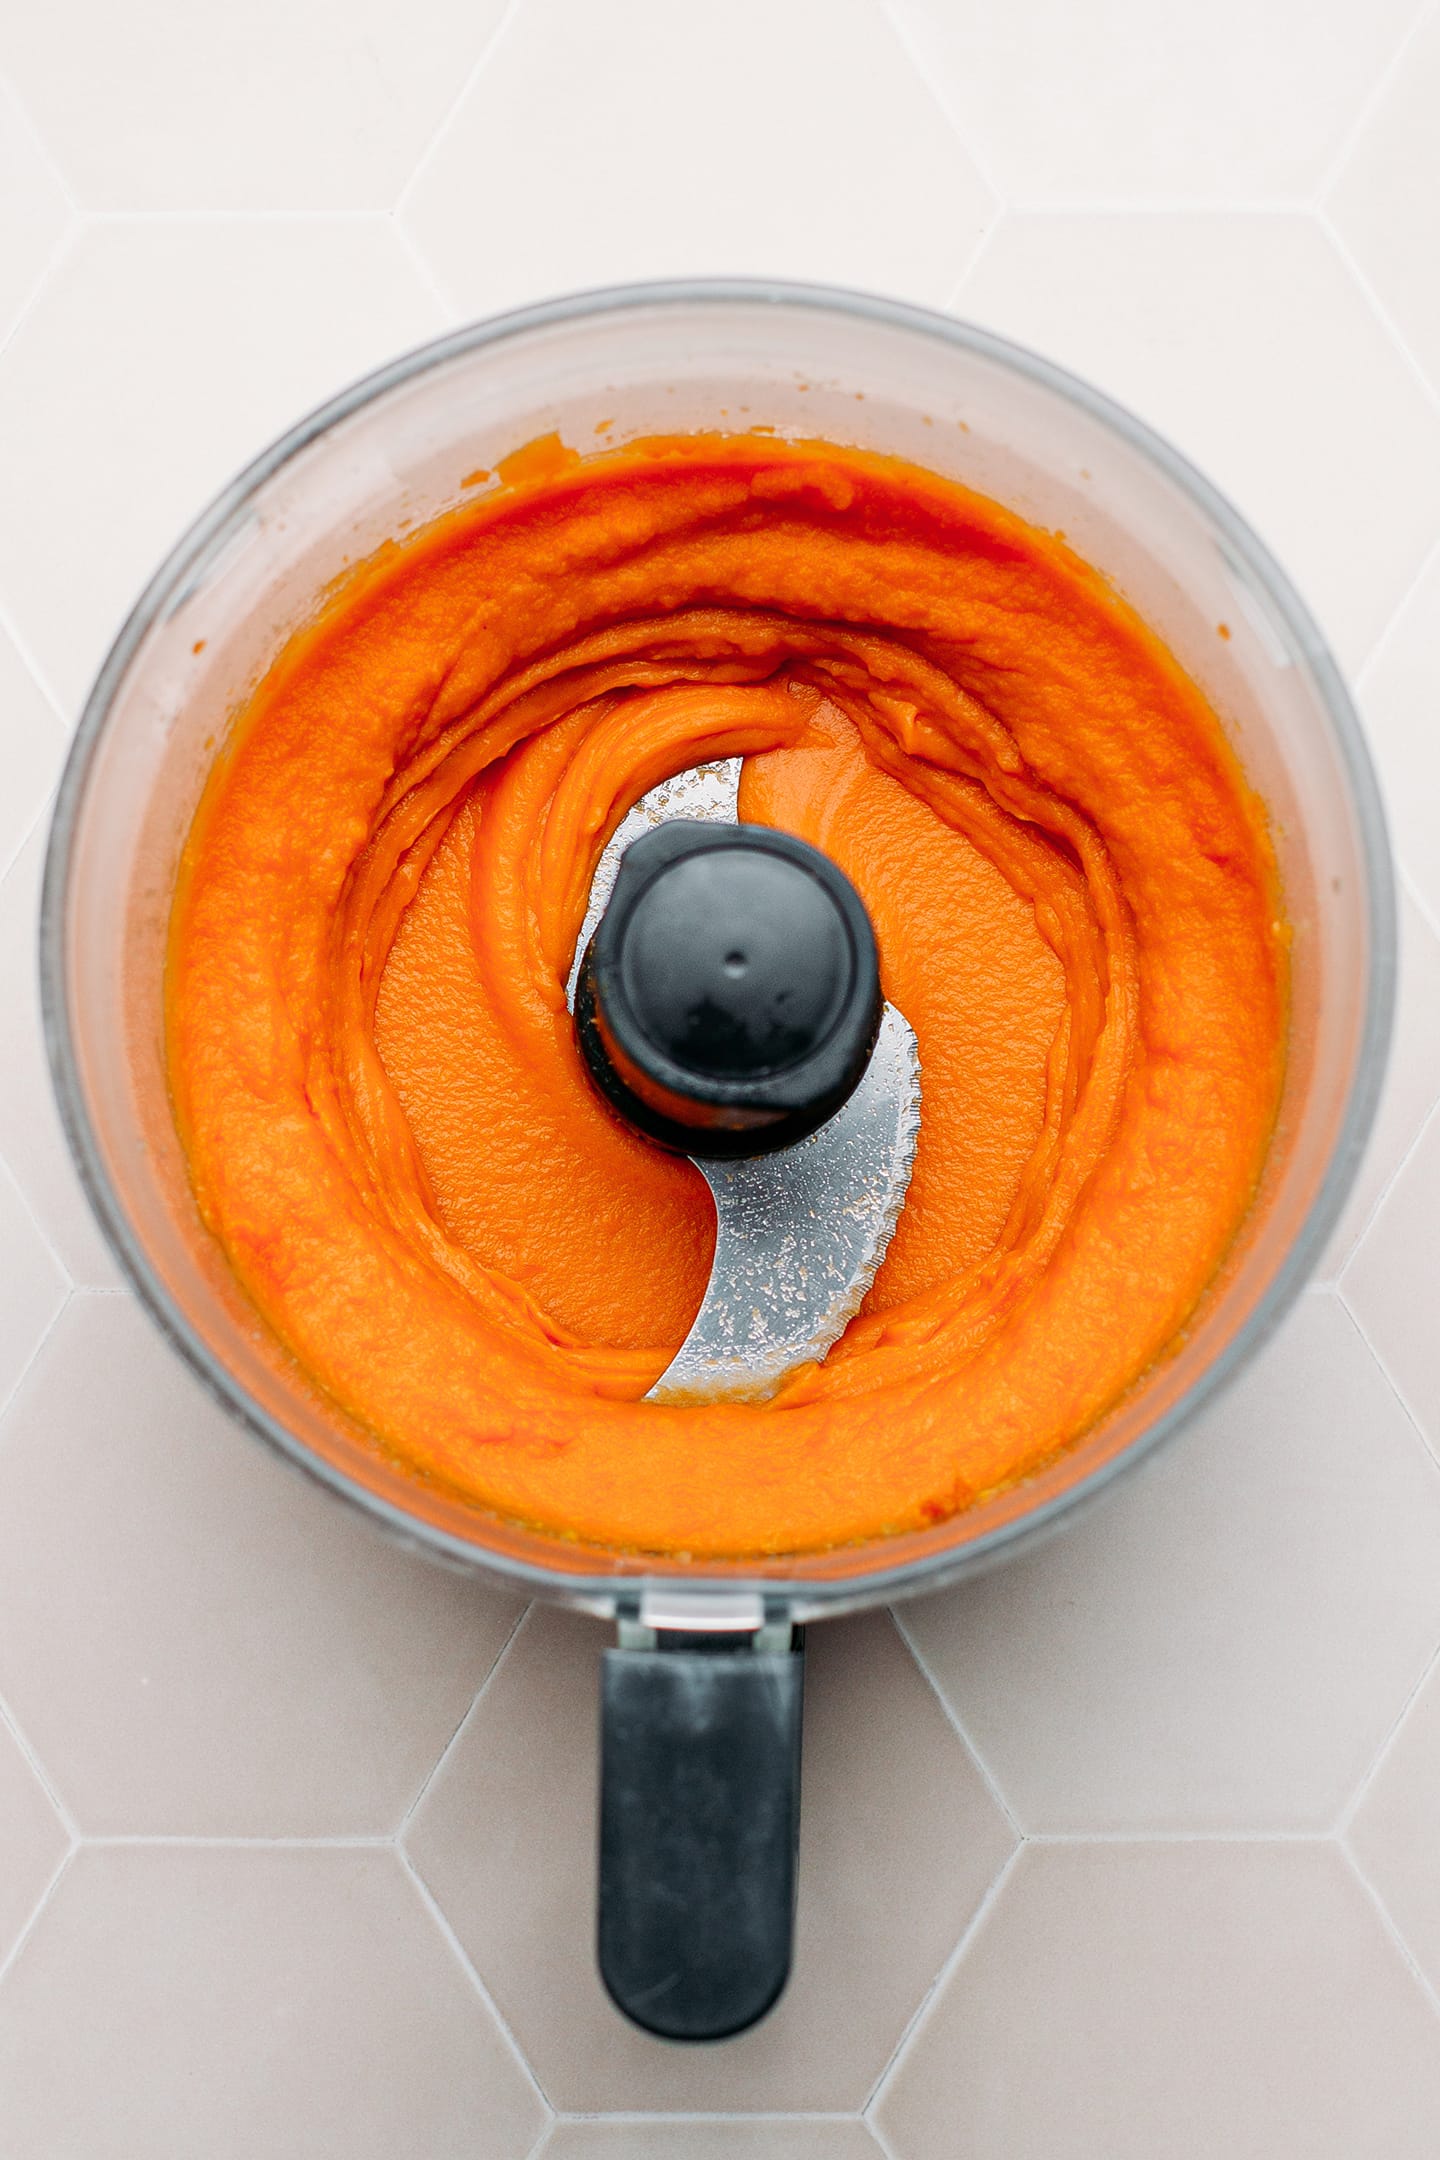 Mashed sweet potatoes in a food processor.